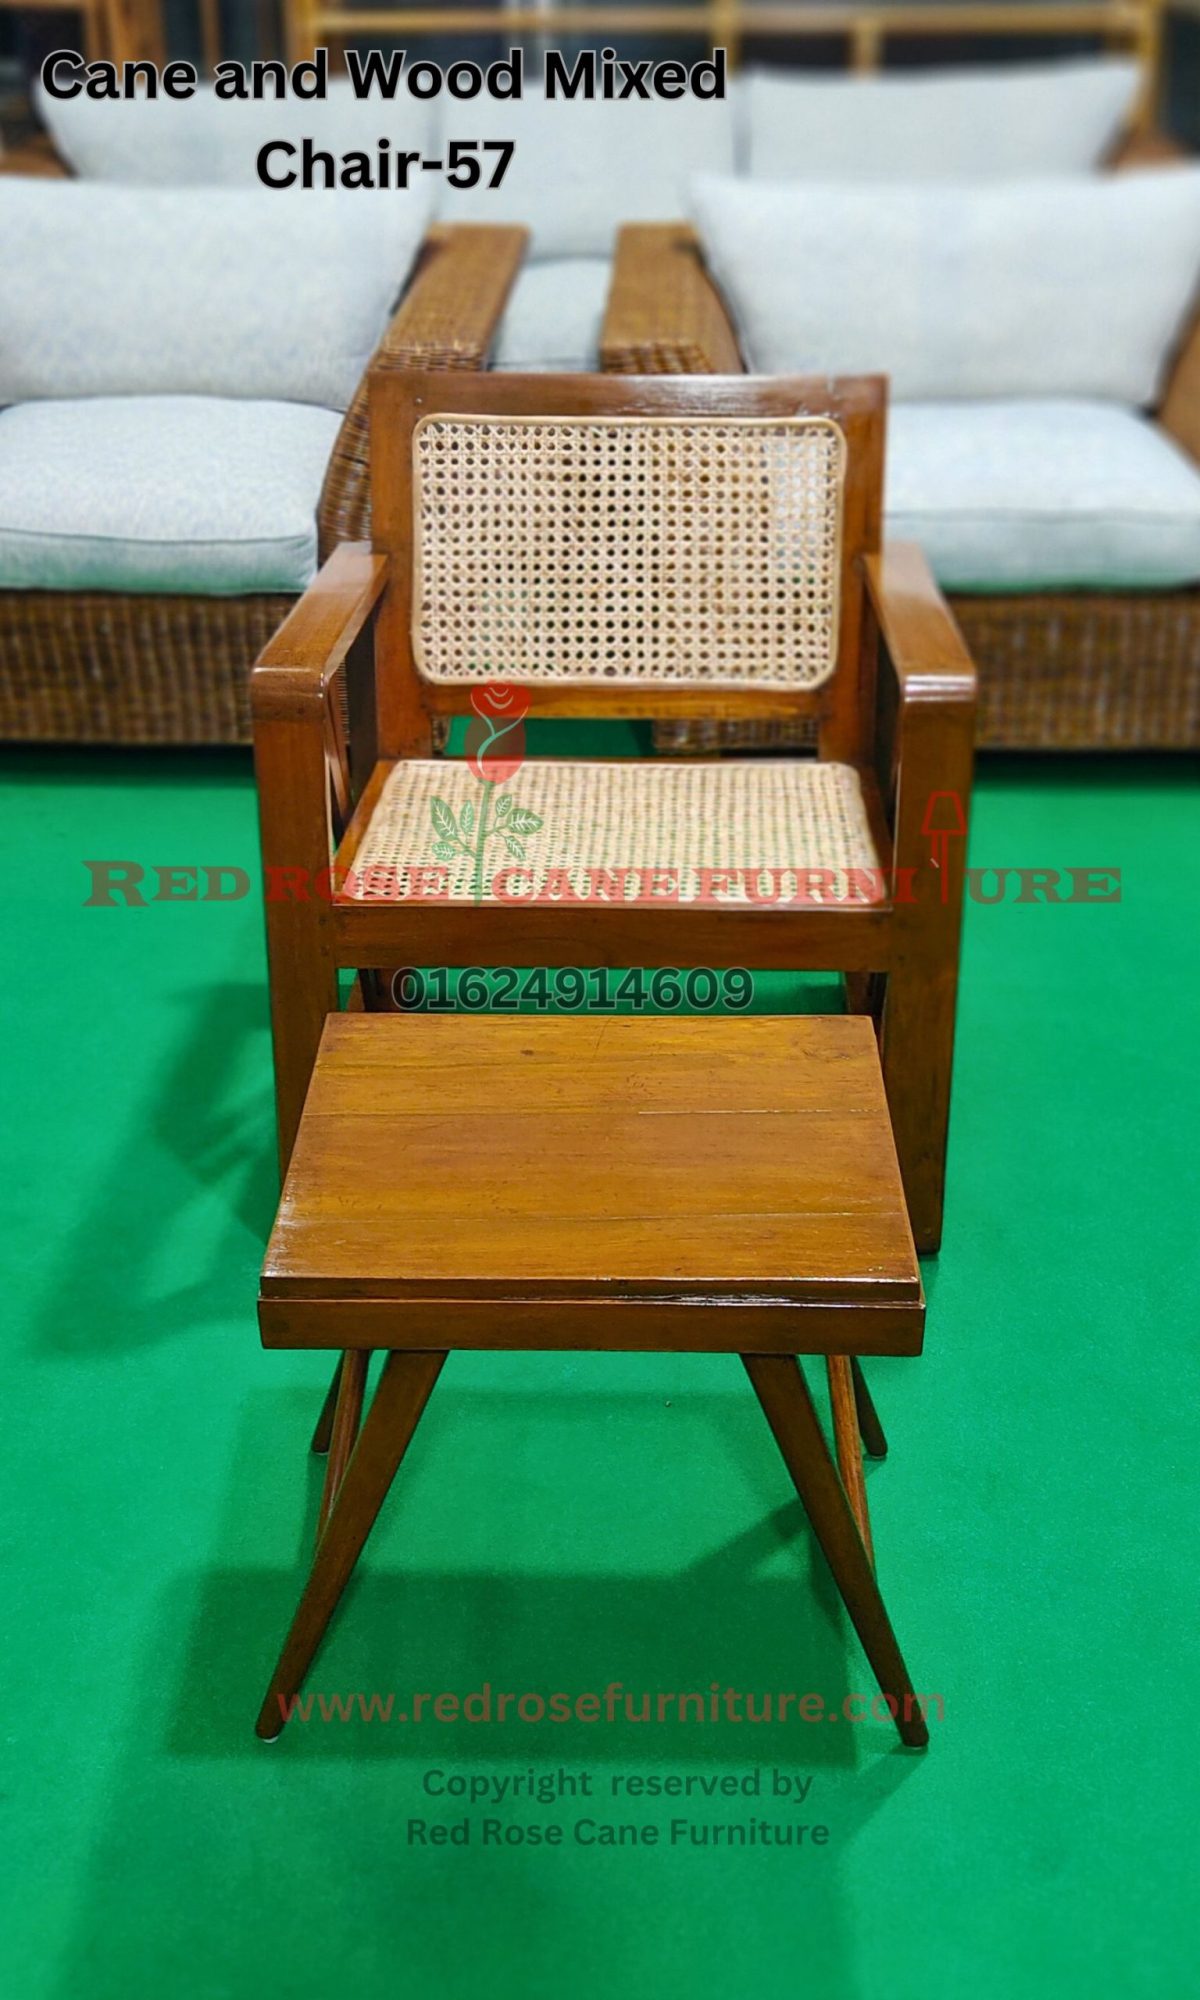 Cane and Wood Mixed Chair-57